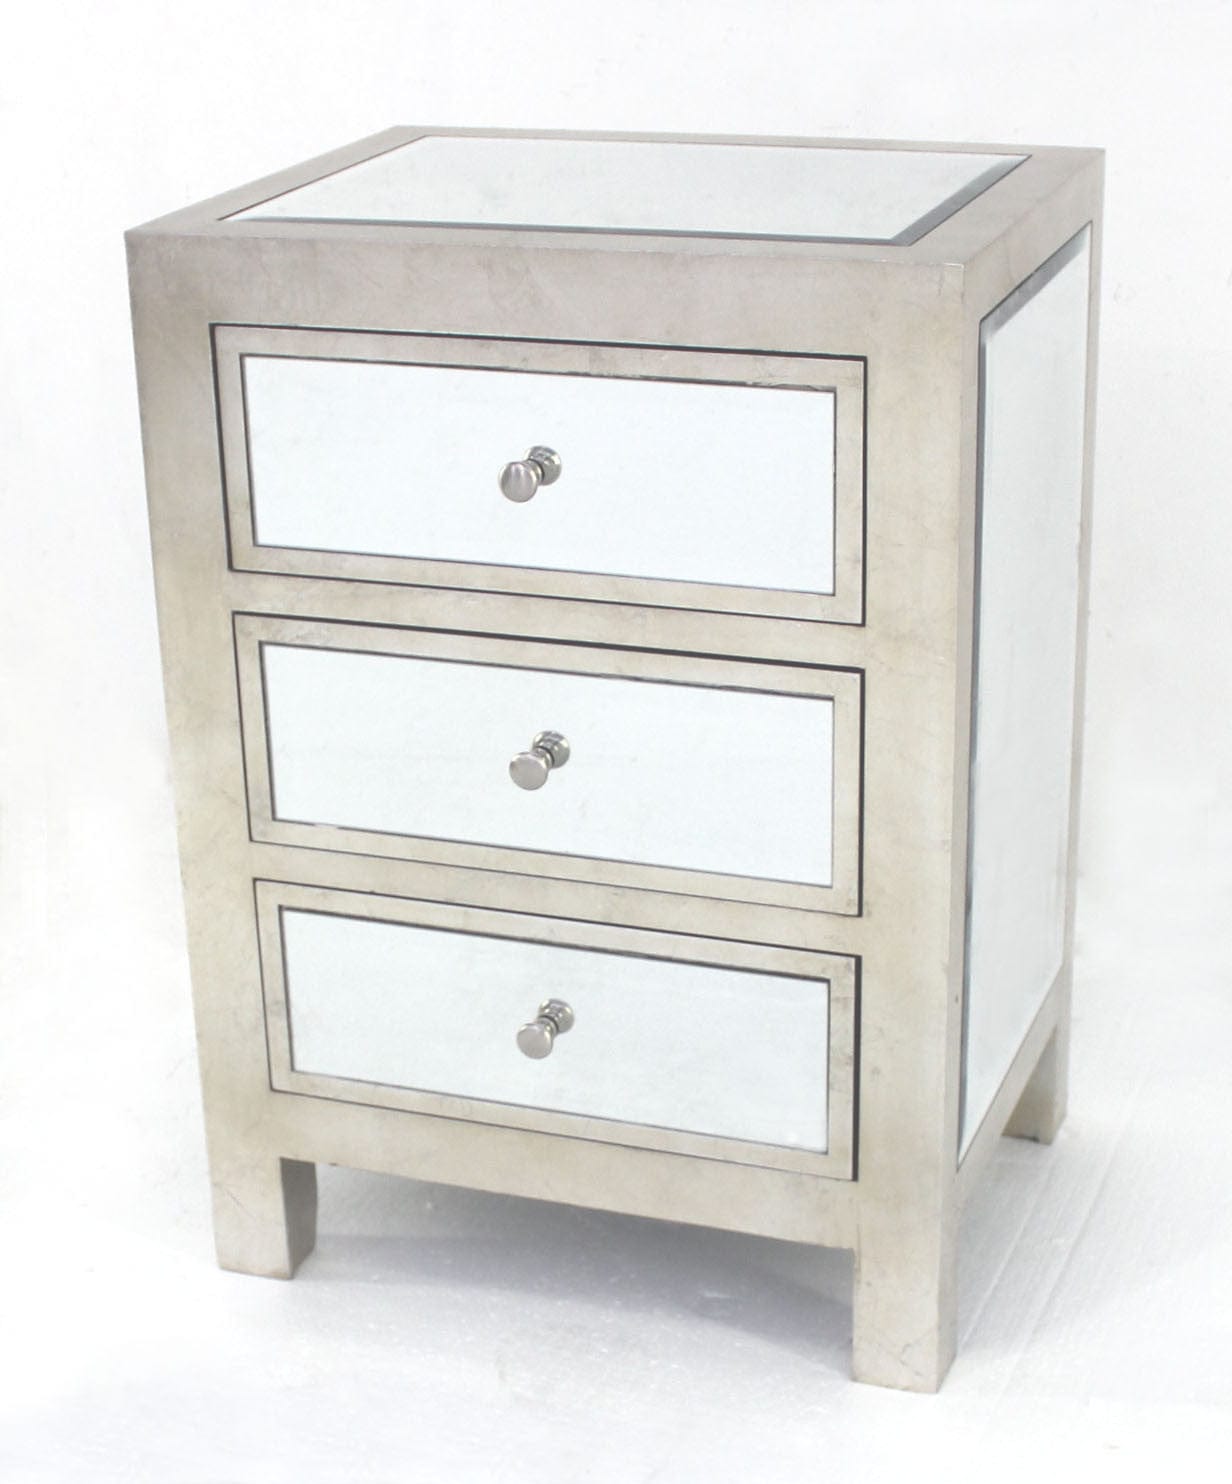 3 Drawer Modern Mirrored - End Table